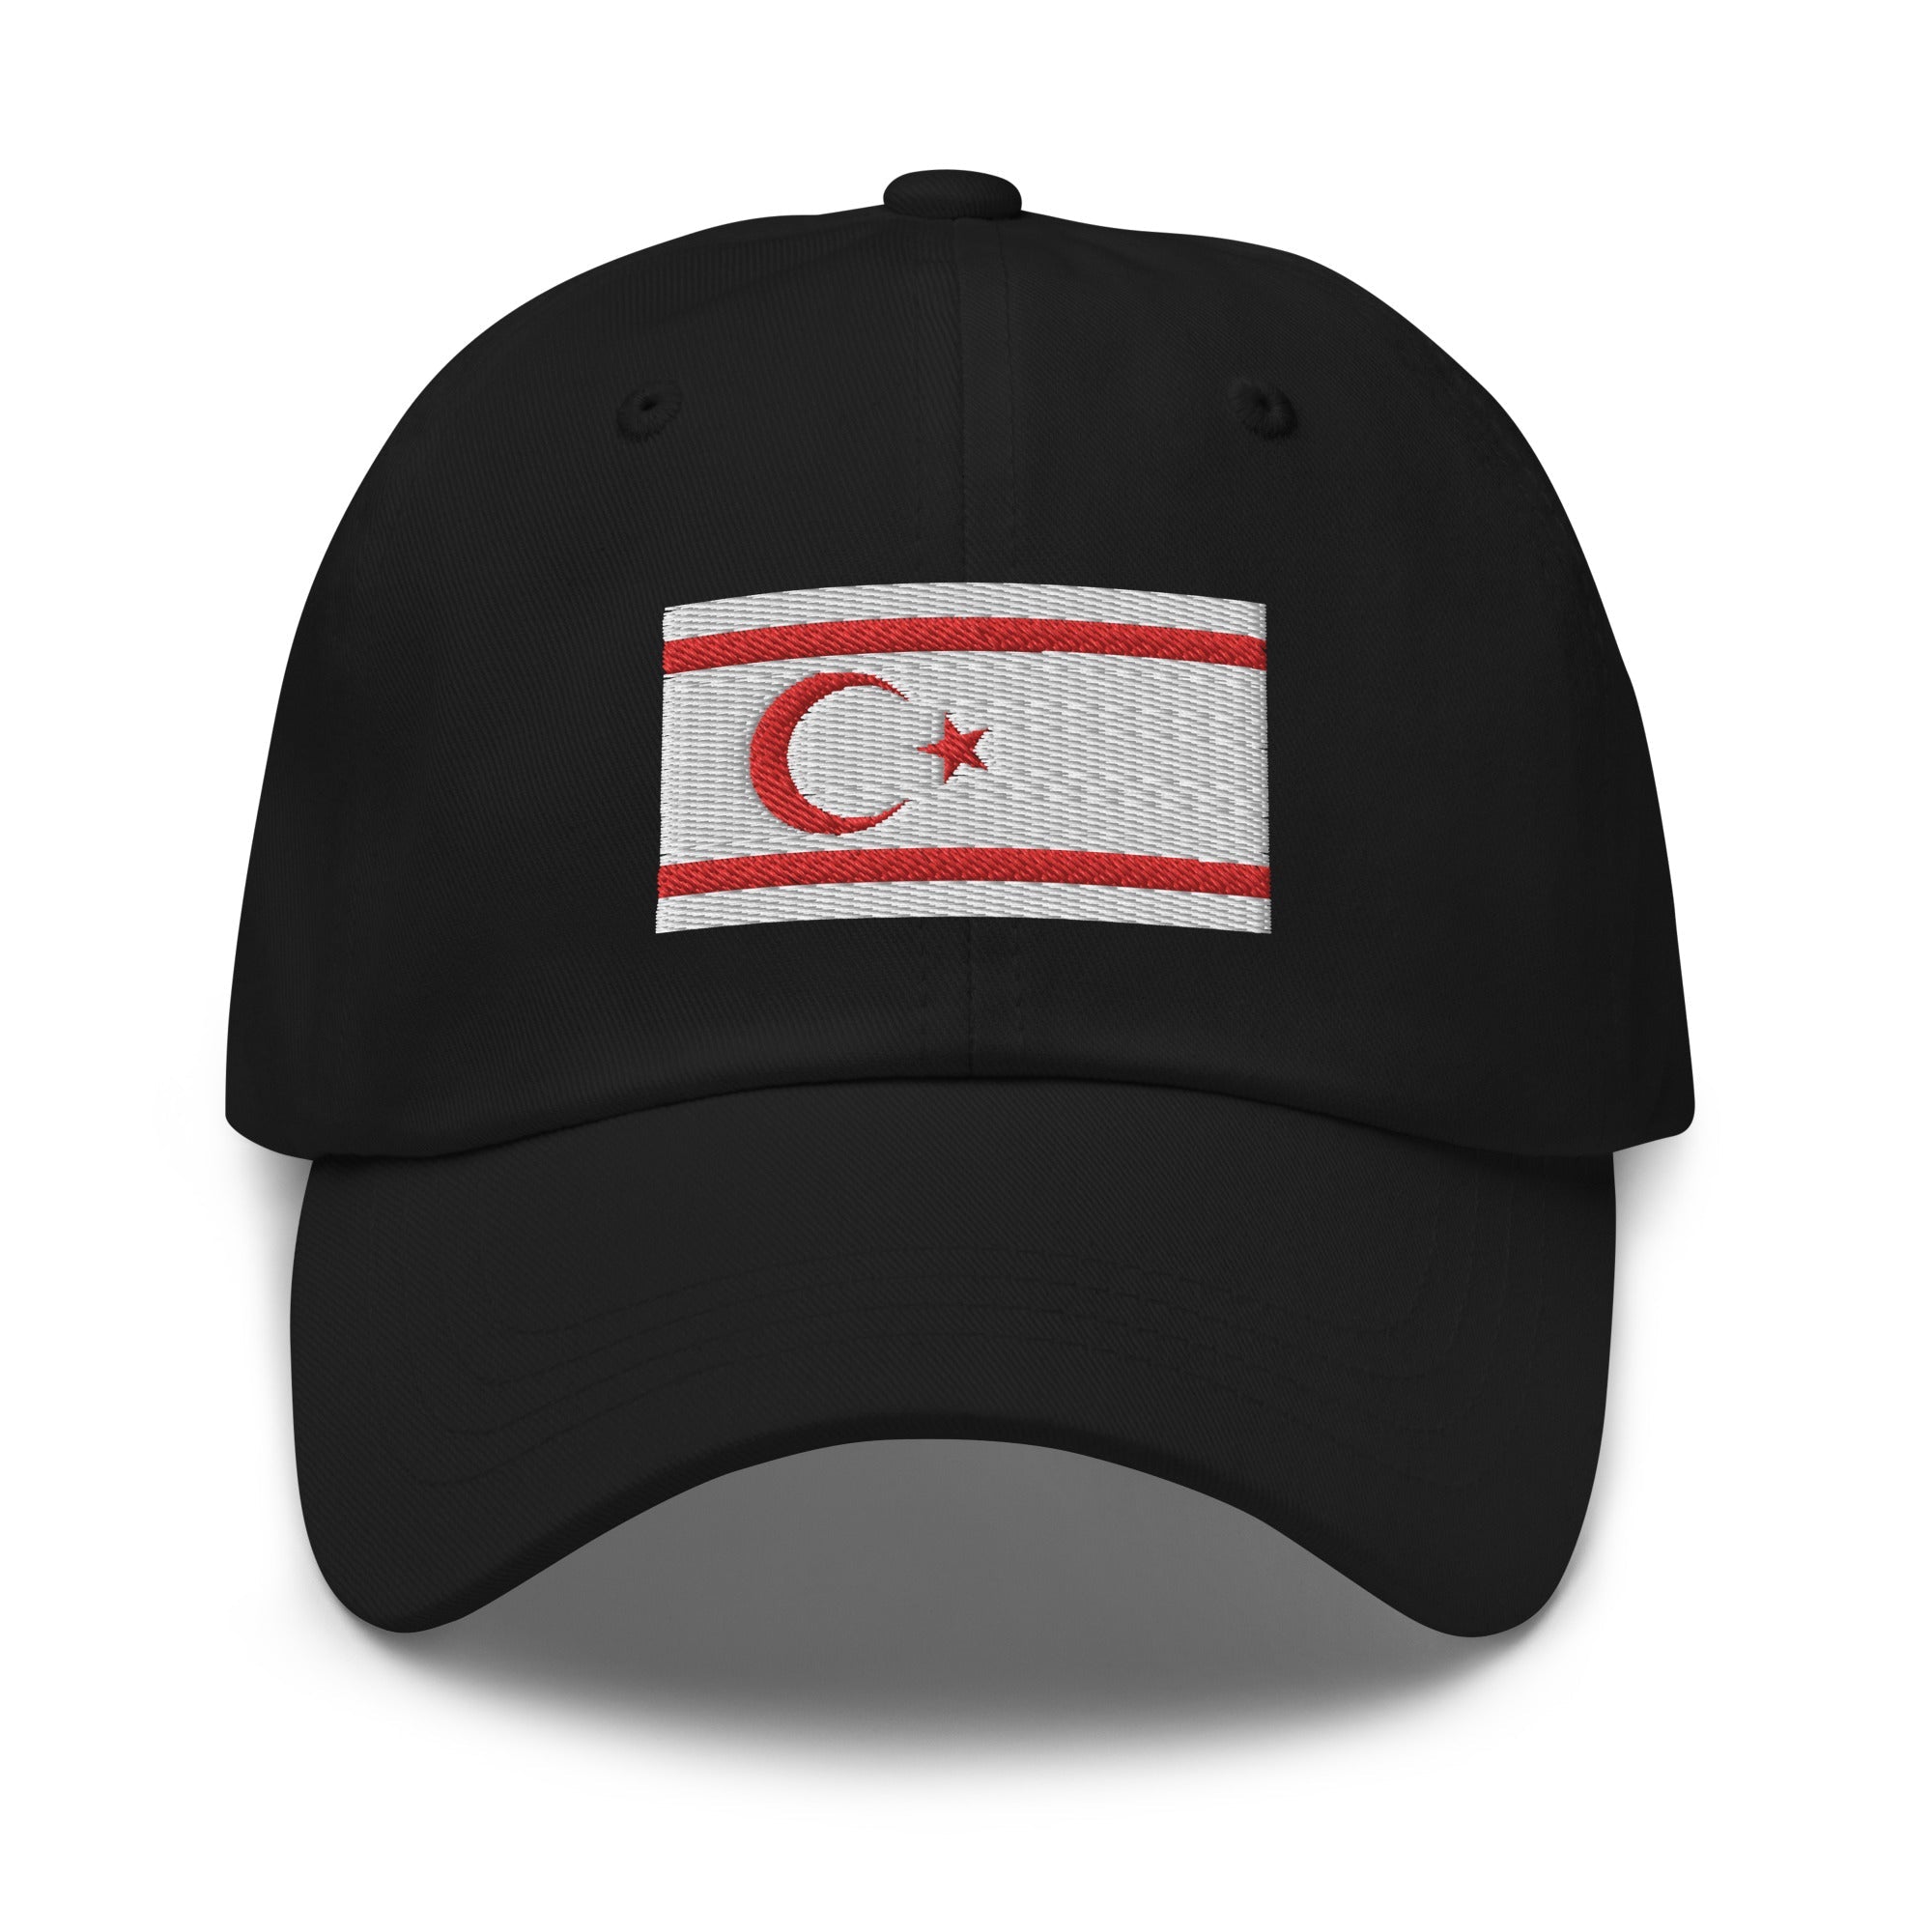 Turkish Republic of Northern Cyprus Flag Cap - Adjustable Embroidered Dad Hat